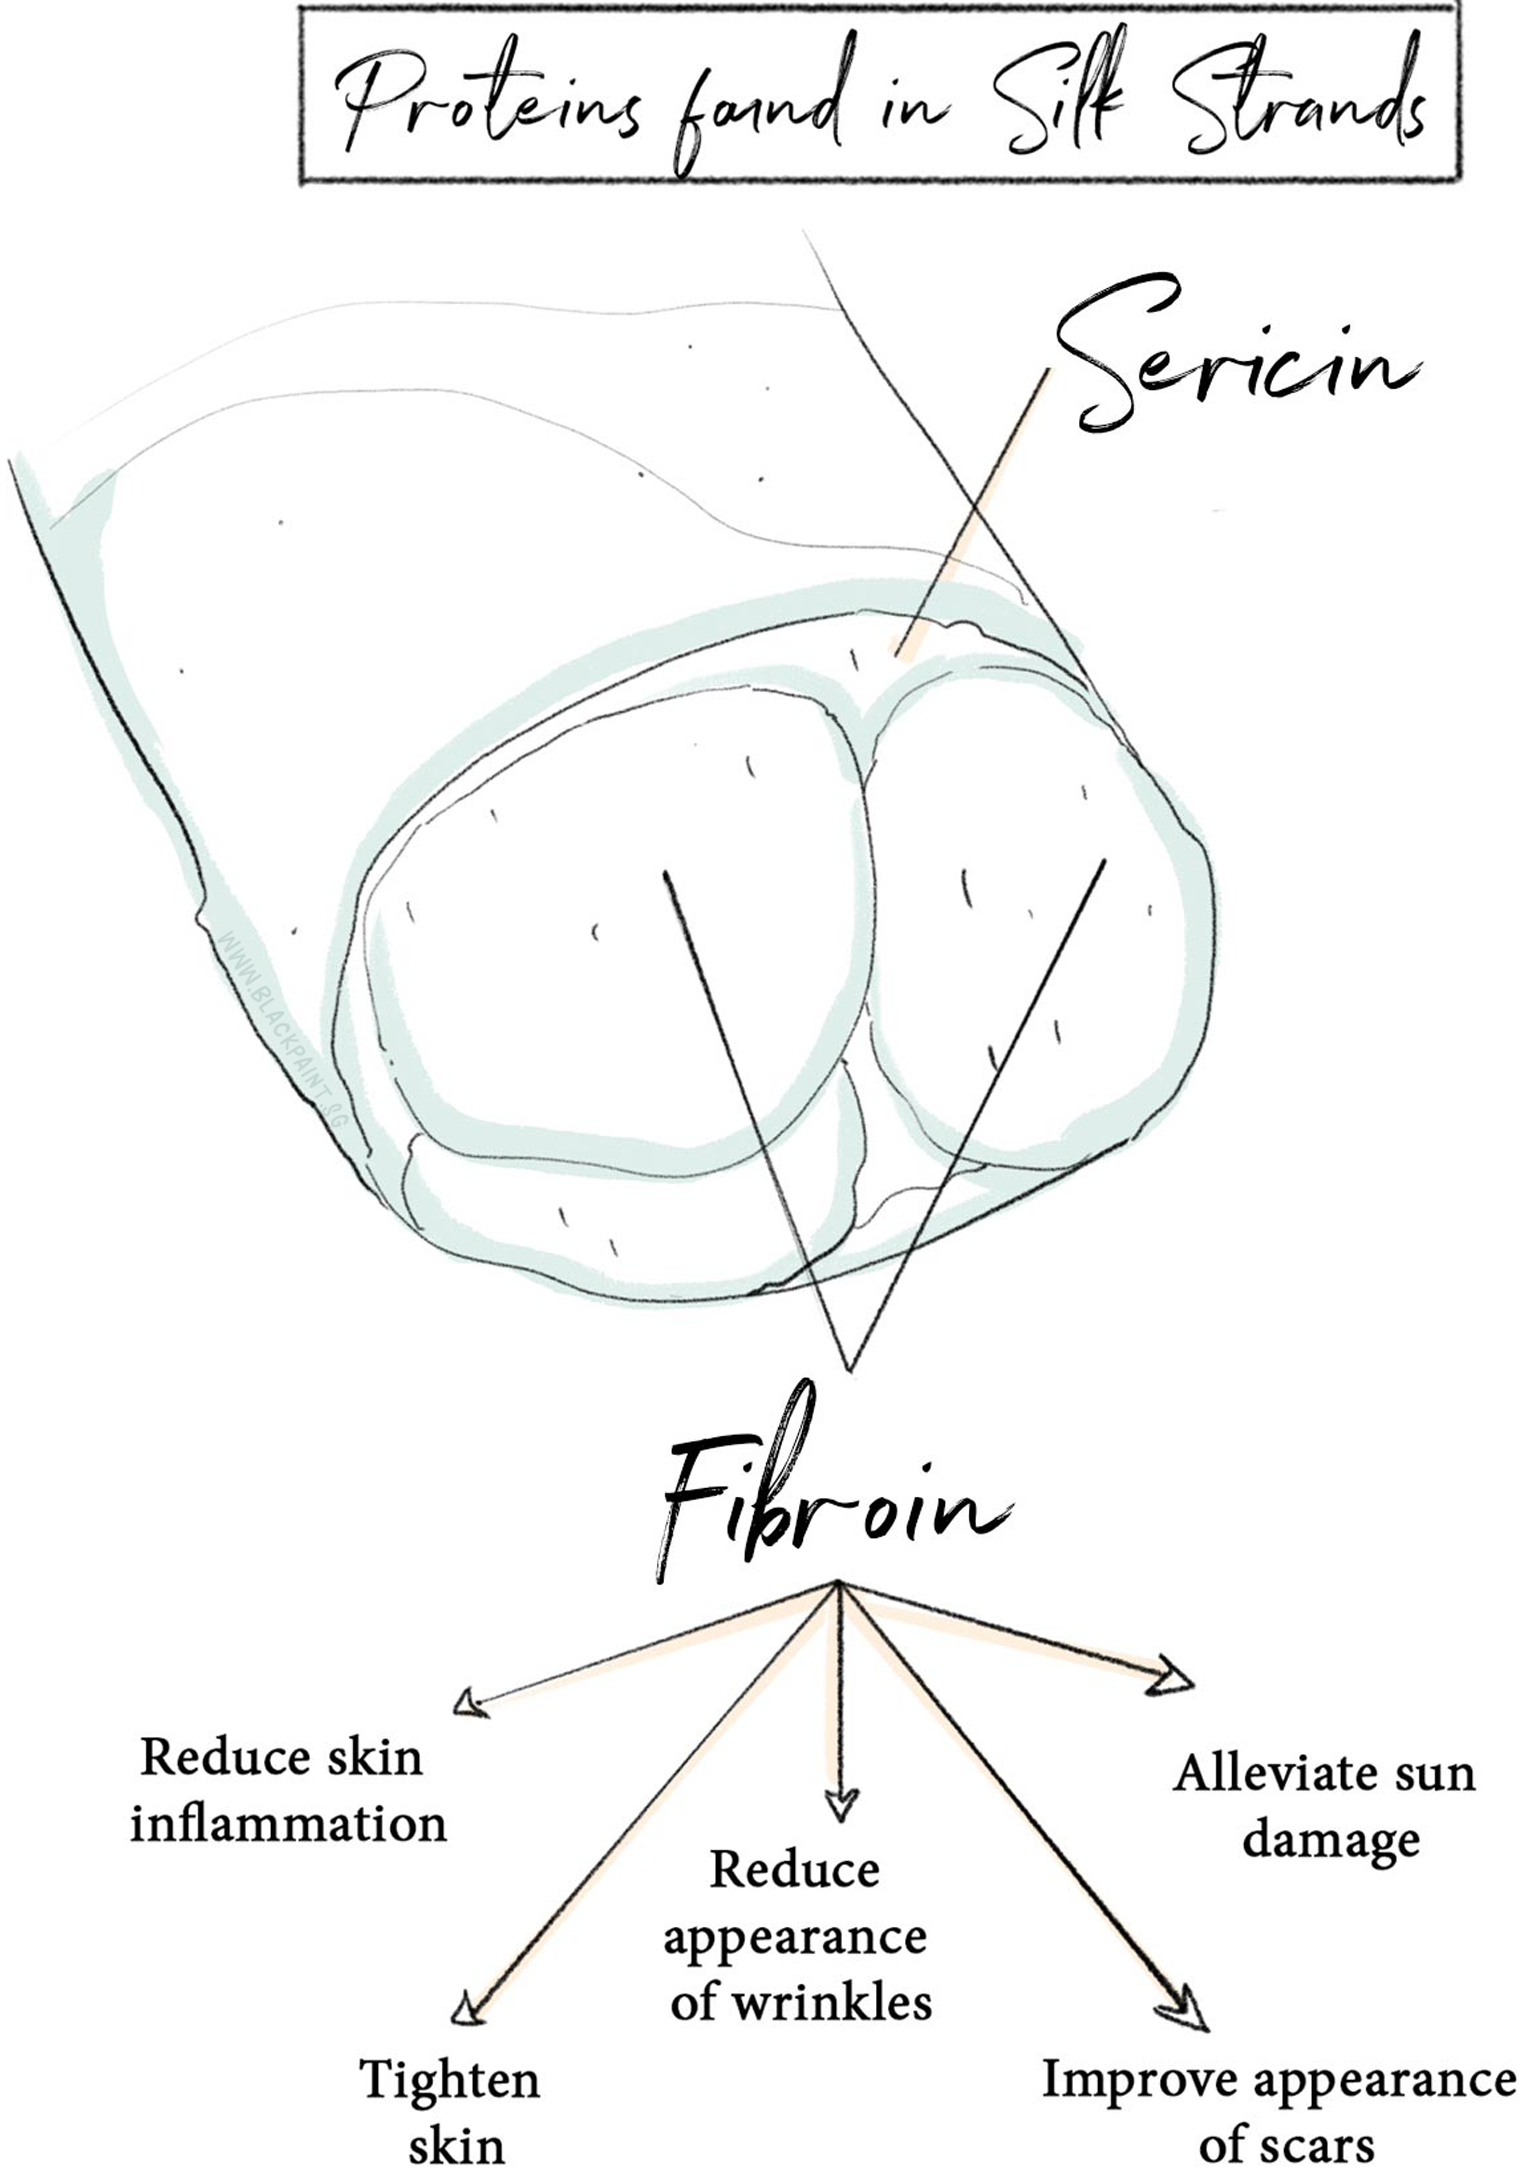 illustration of sericin and fibroin being the two key proteins found in silk strands